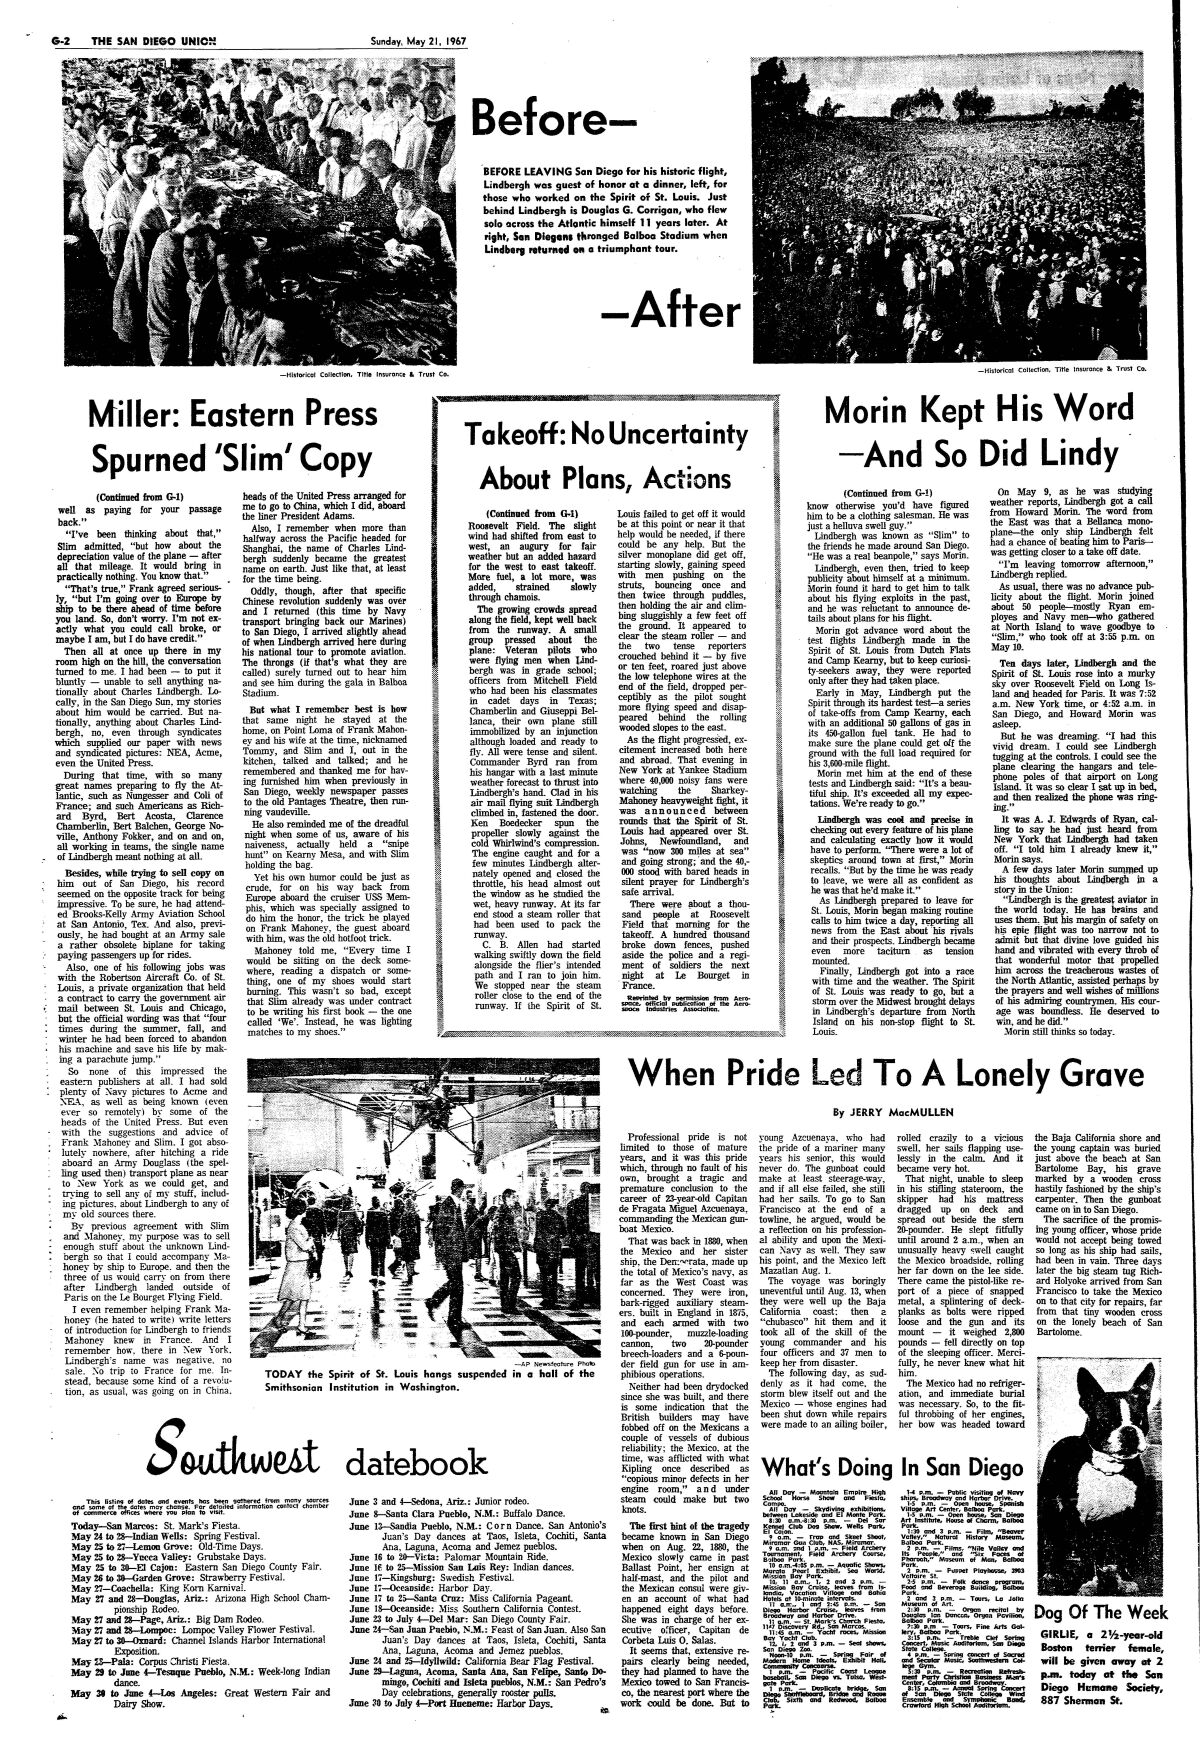 Page G-2 from The San Diego Union, Sunday, May, 21, 1967 